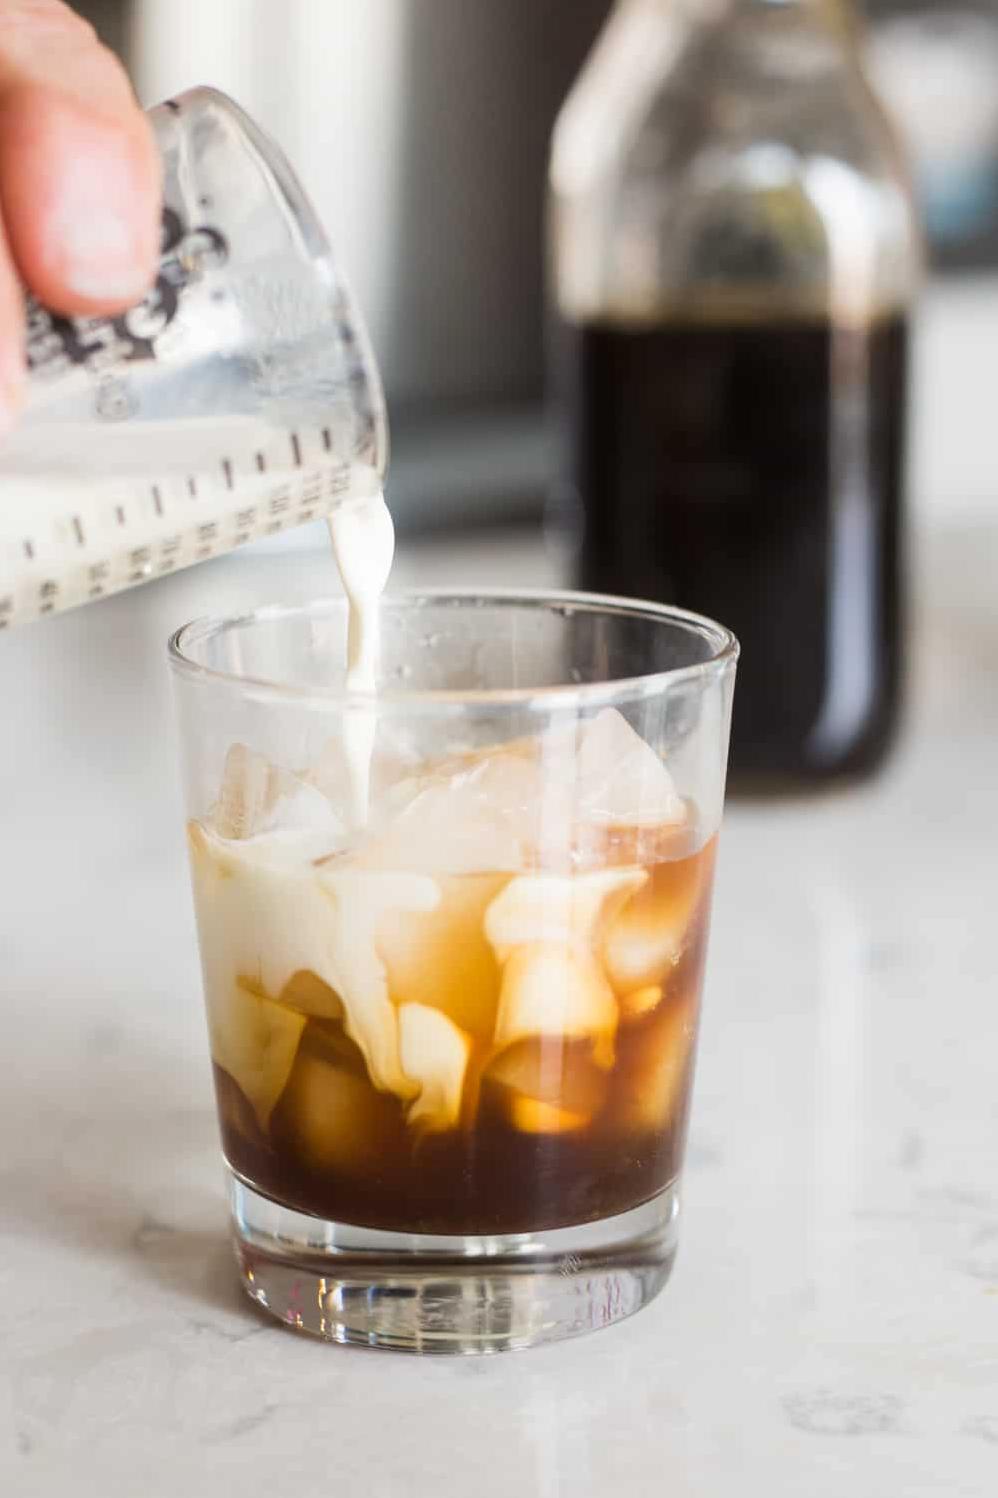  A shot of Kahlua can turn your morning coffee into an indulgent treat!